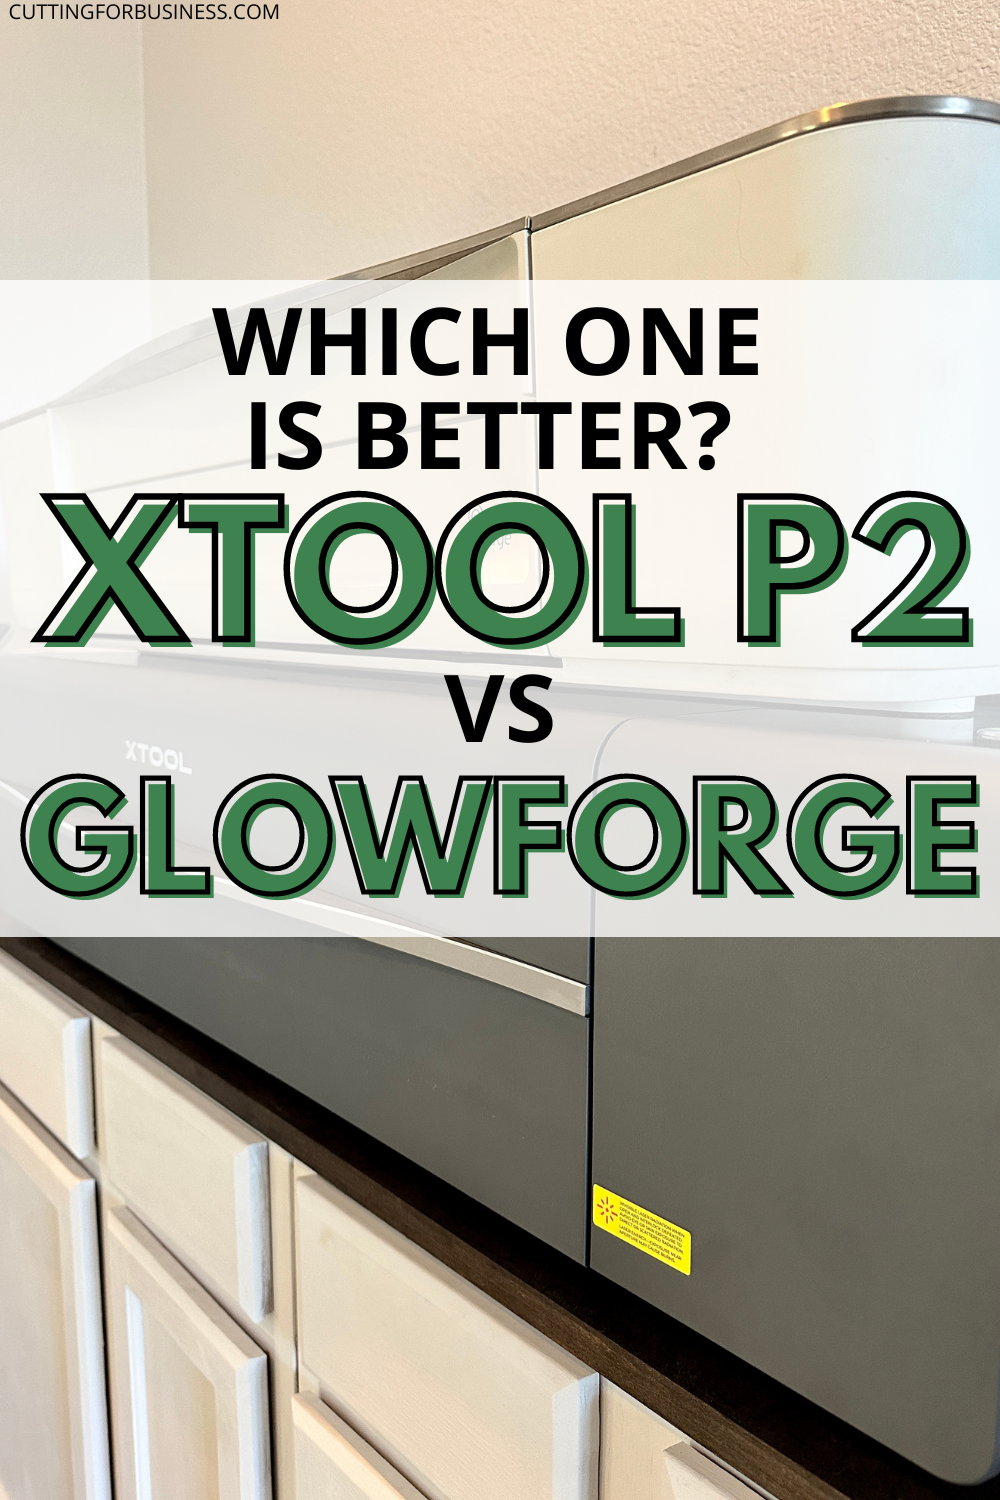 xTool P2 vs Glowforge - Which One is Better - cuttingforbusiness.com